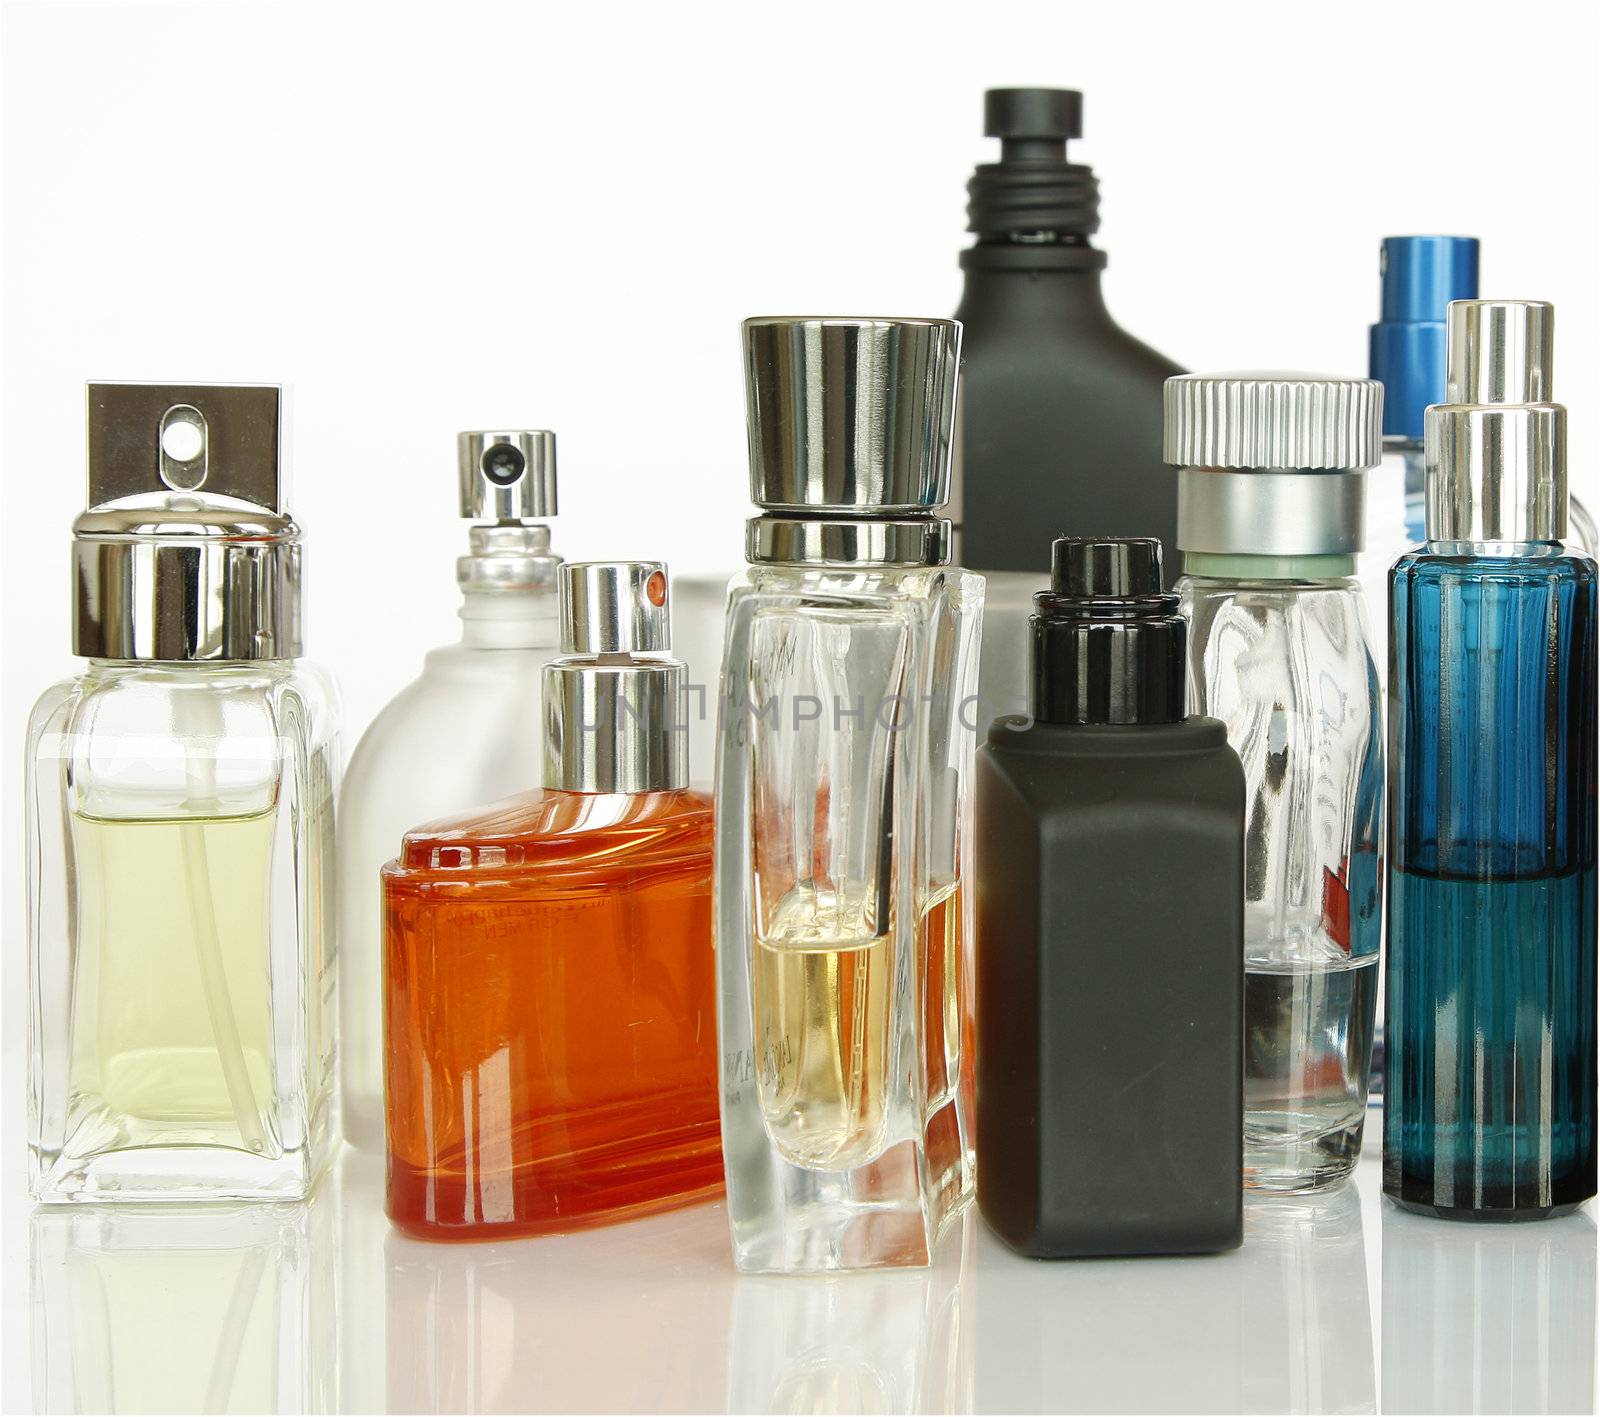 Perfume and Fragrances bottles by sacatani